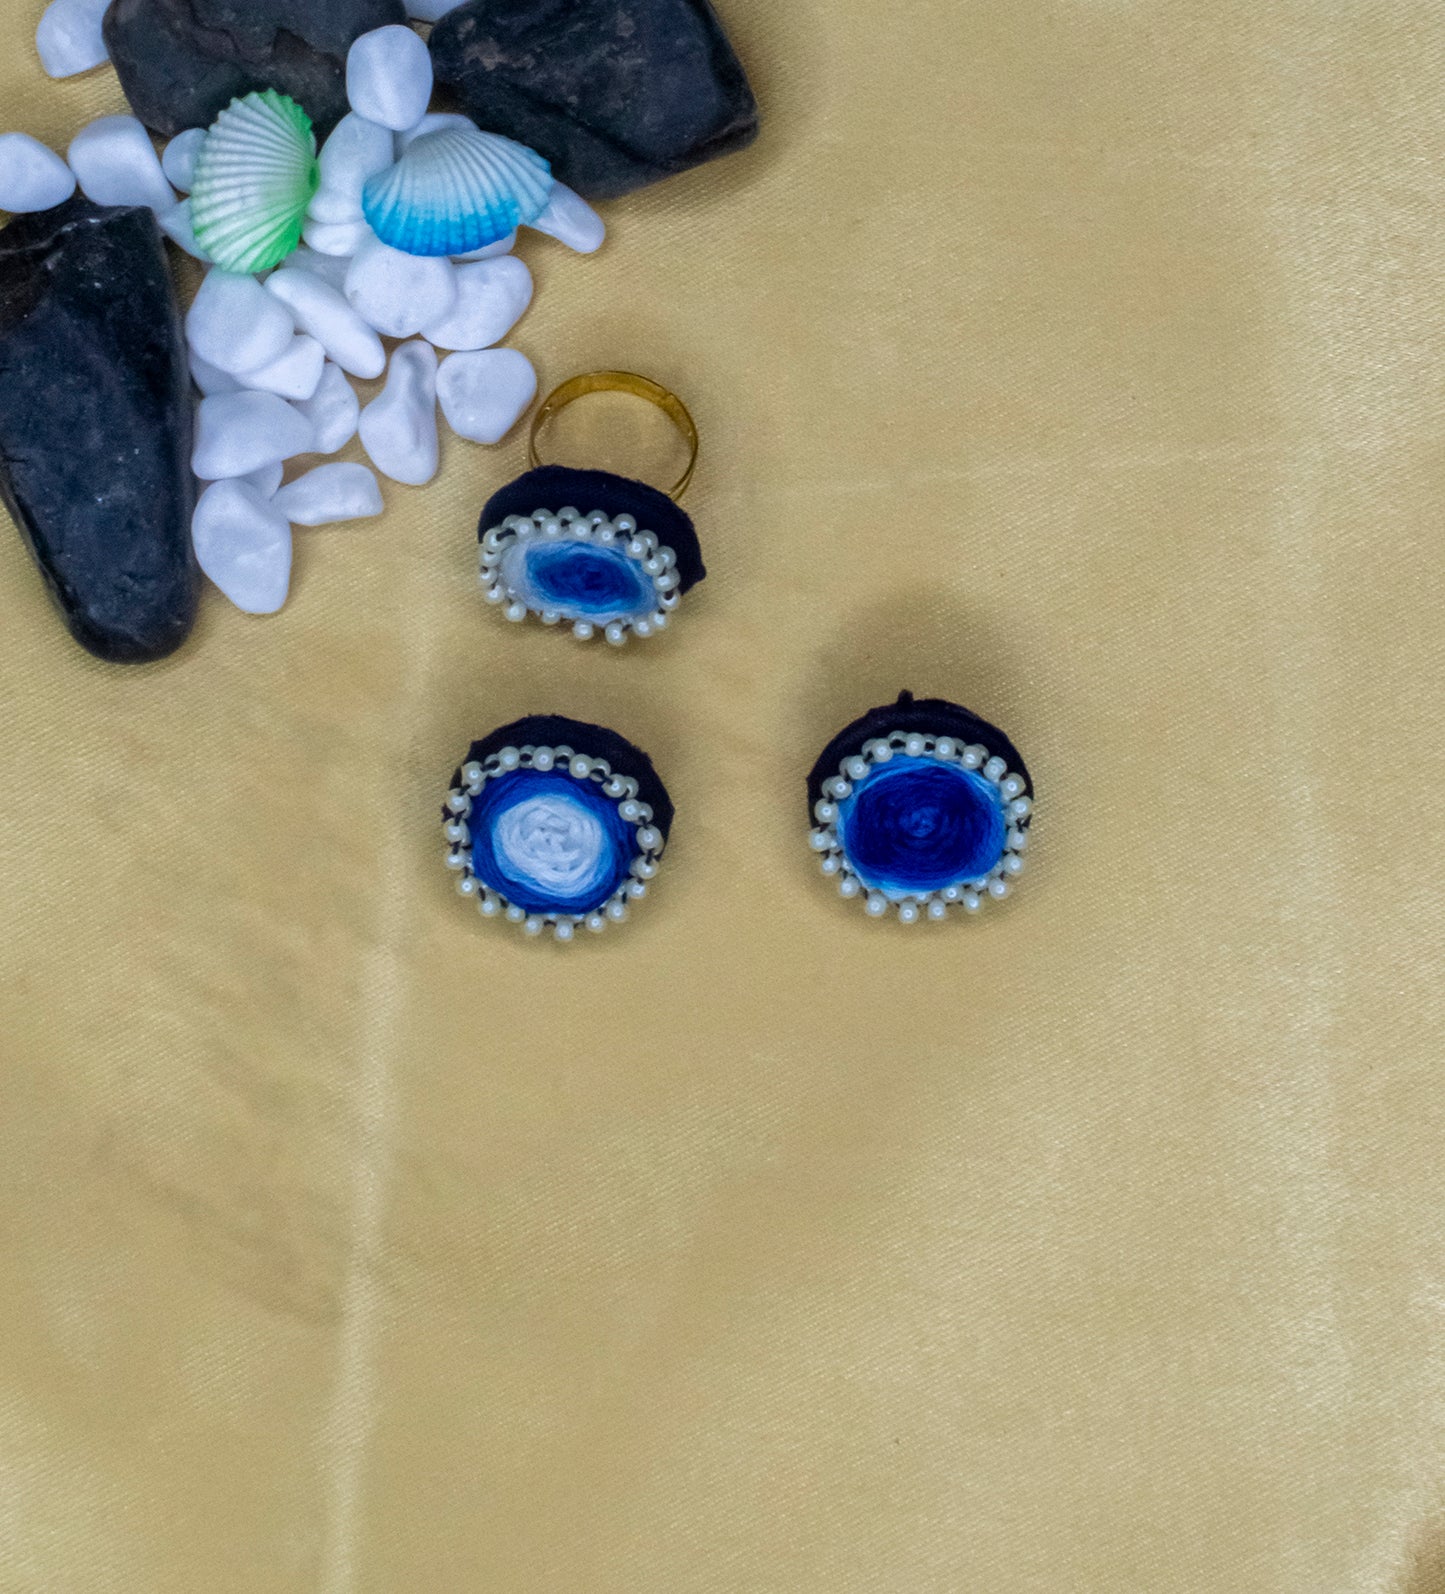 Jia Embroidered Fabric Earrings with Finger Ring : Handmade